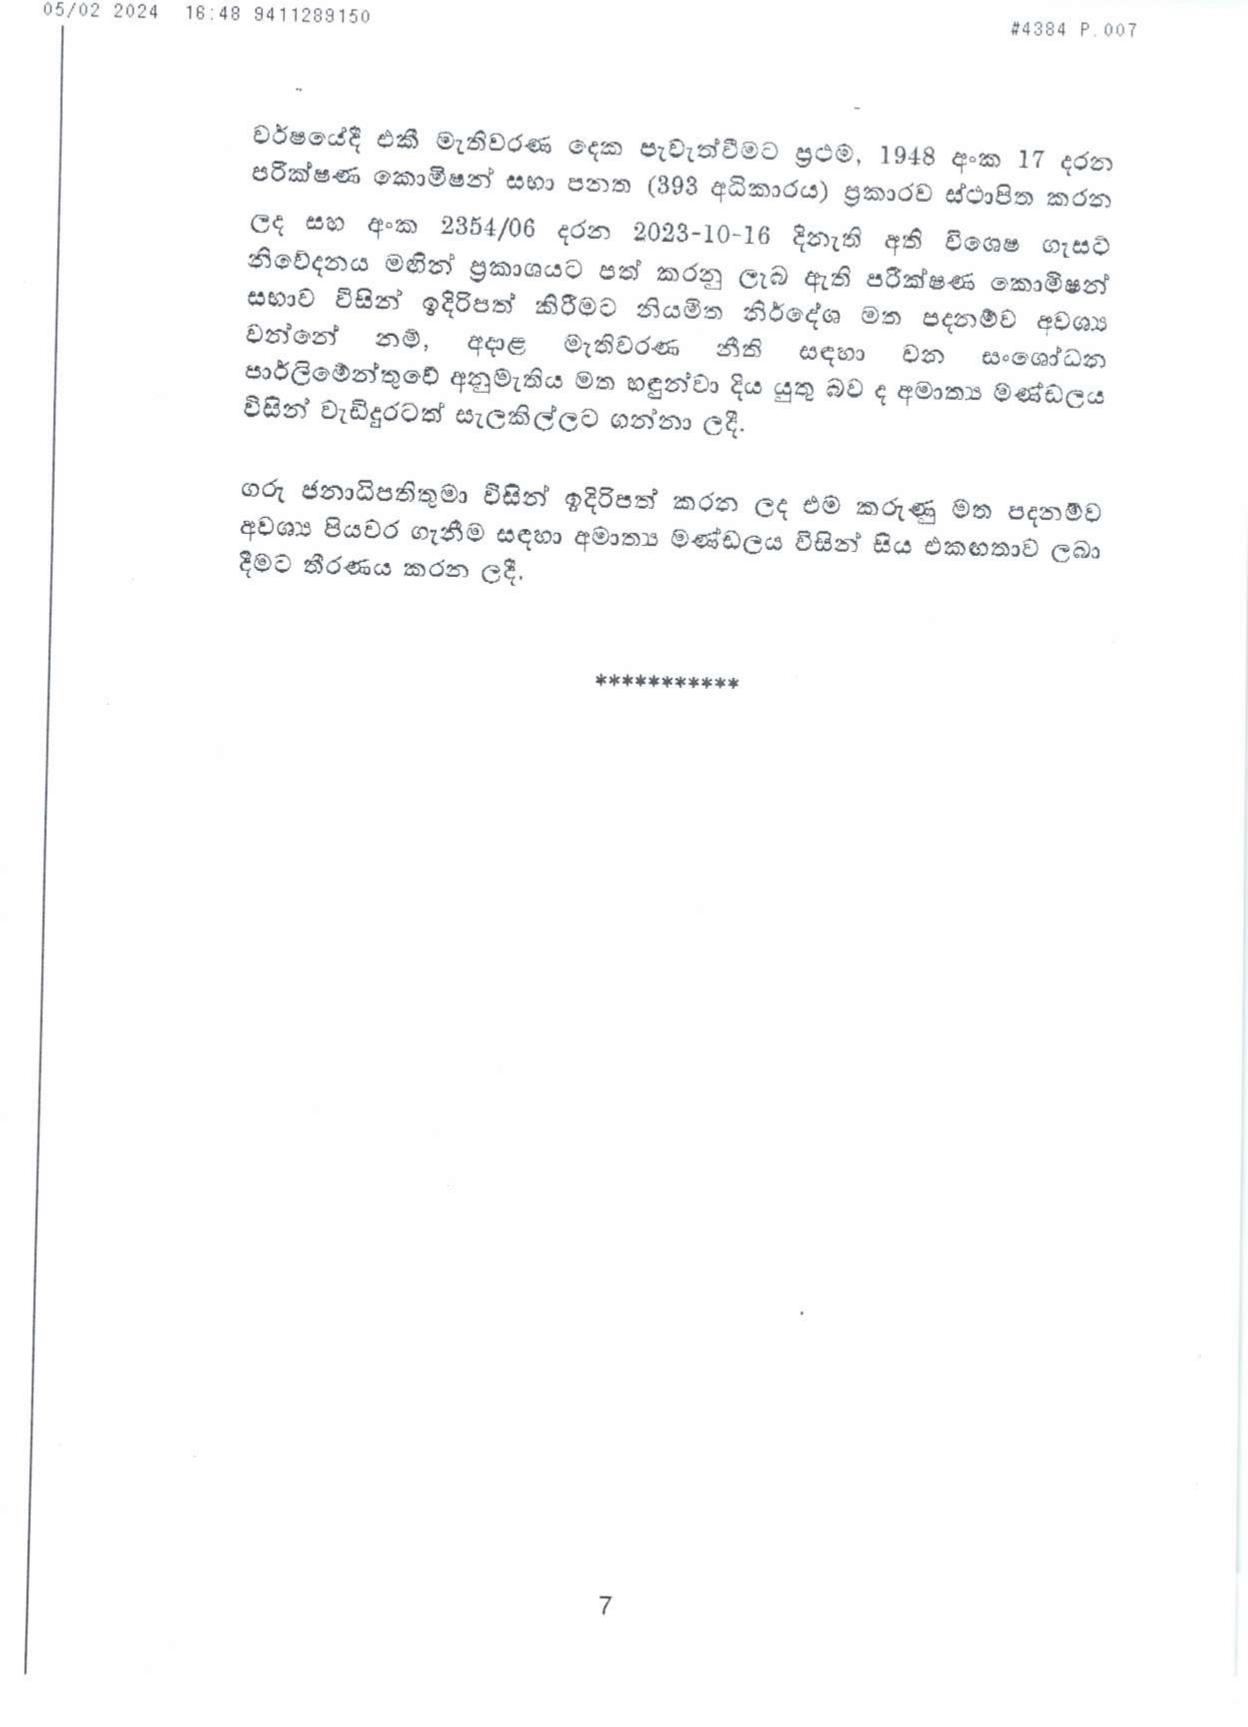 Cabinet Decision on 05.02.2024 page 0007